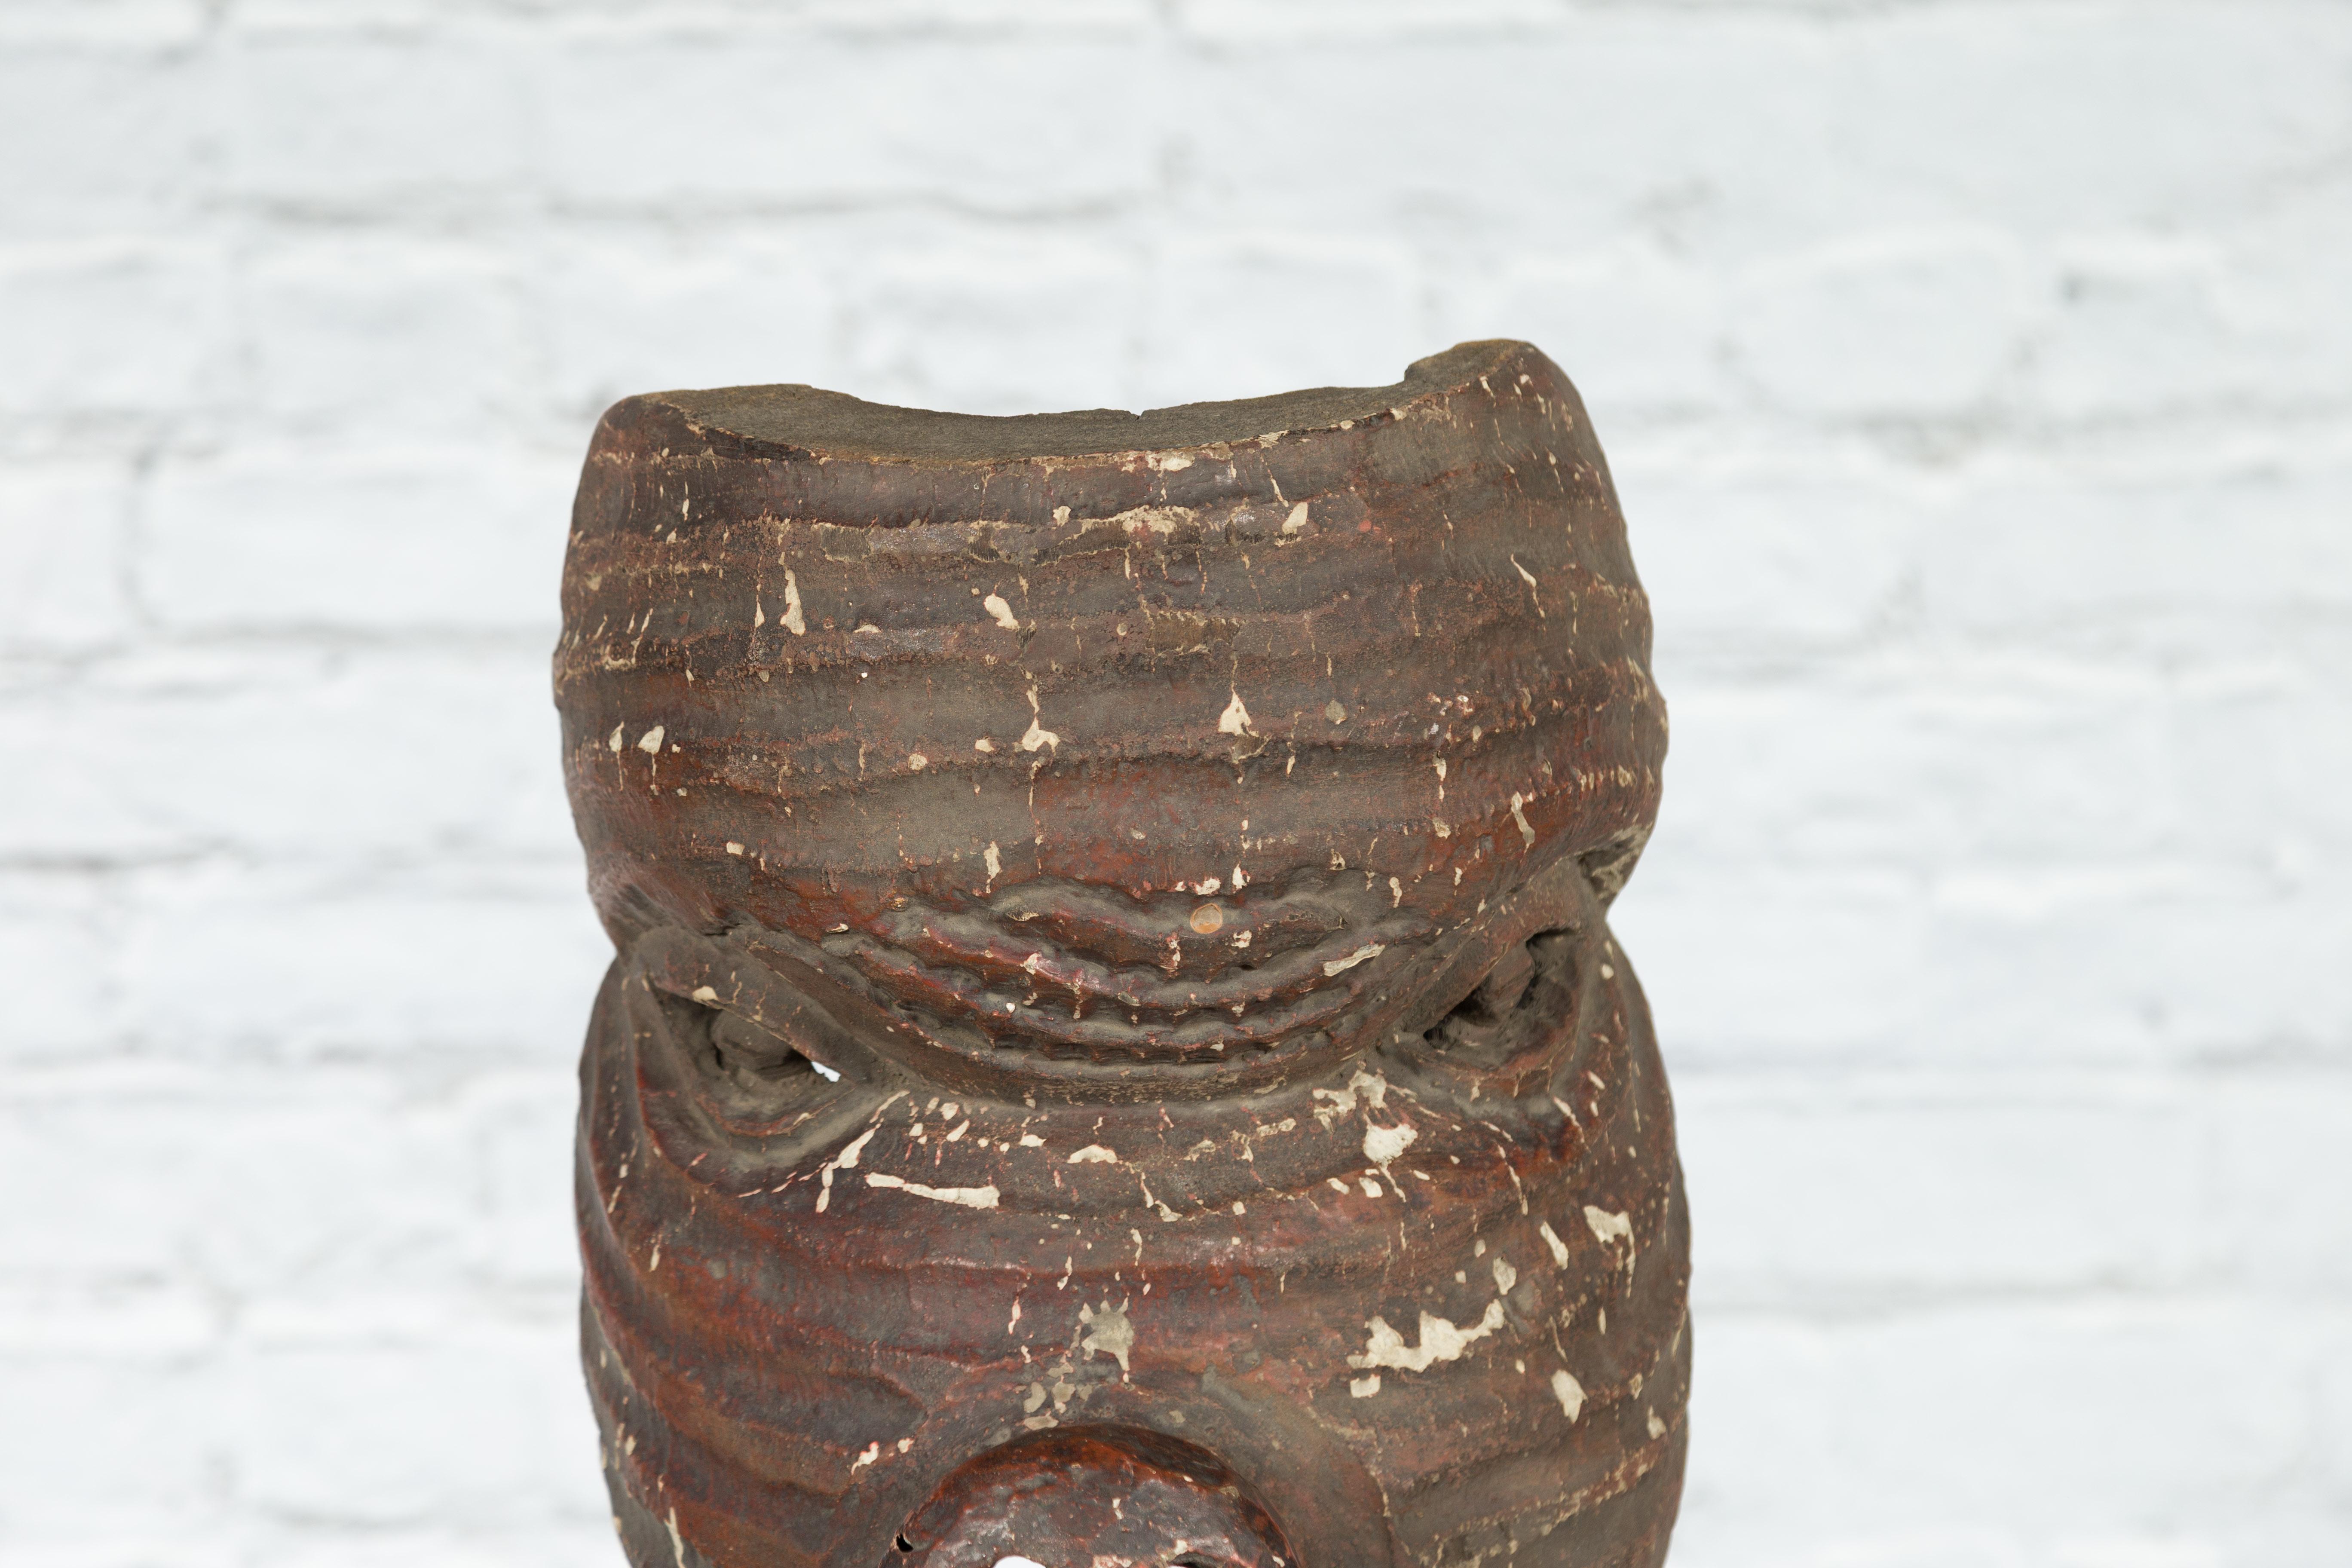 Antique Thai Tribal Carved Wooden Mask Depicting a Swine with Pierced Eyes In Good Condition For Sale In Yonkers, NY